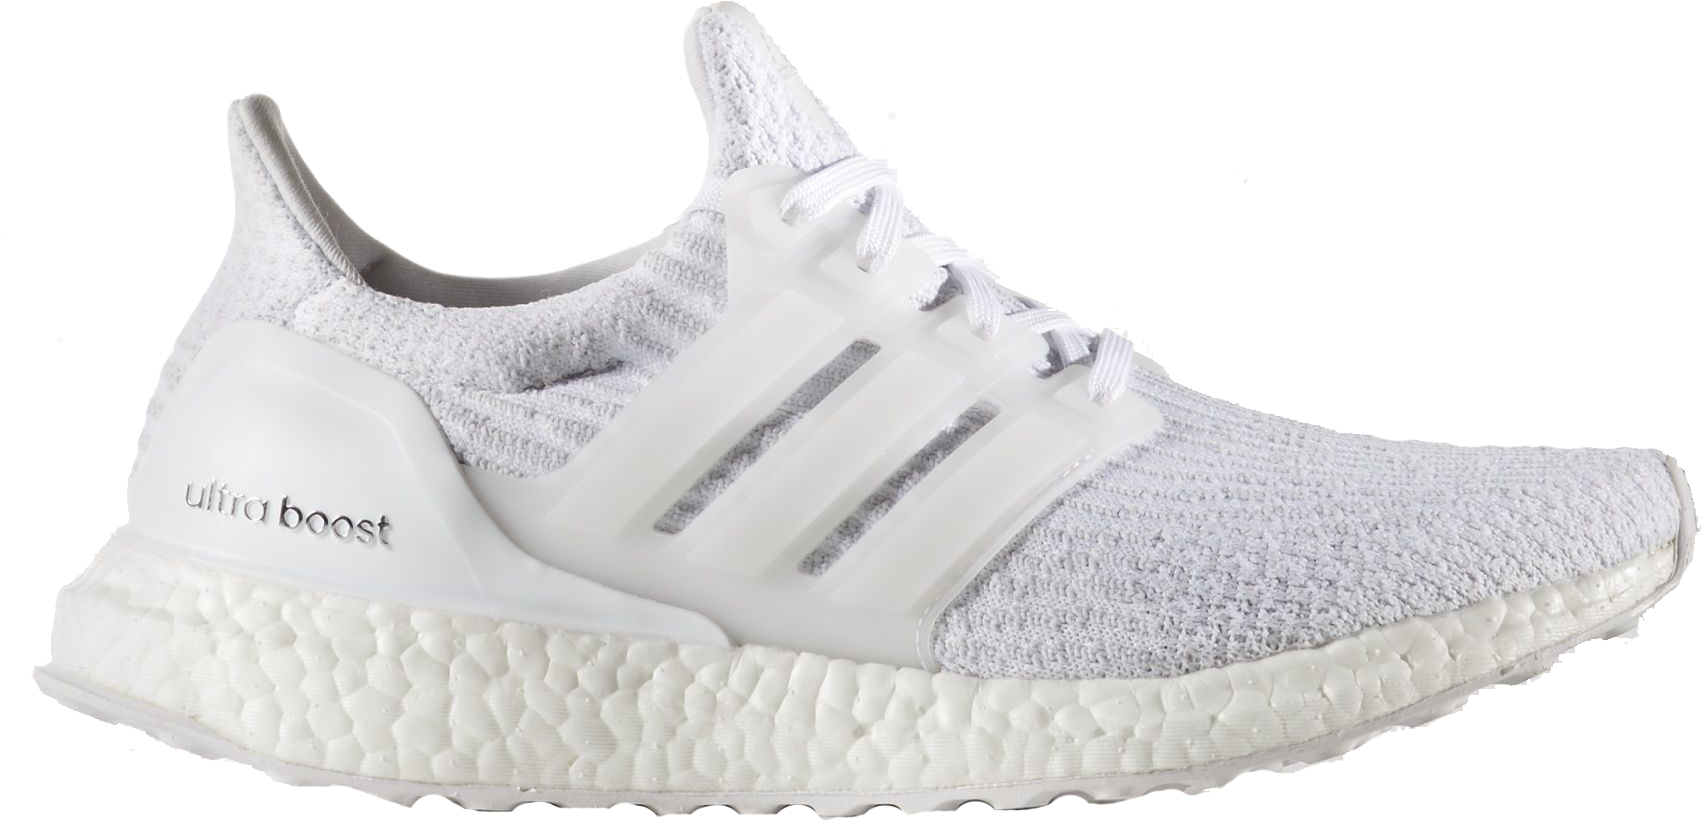 adidas ultra boost white images